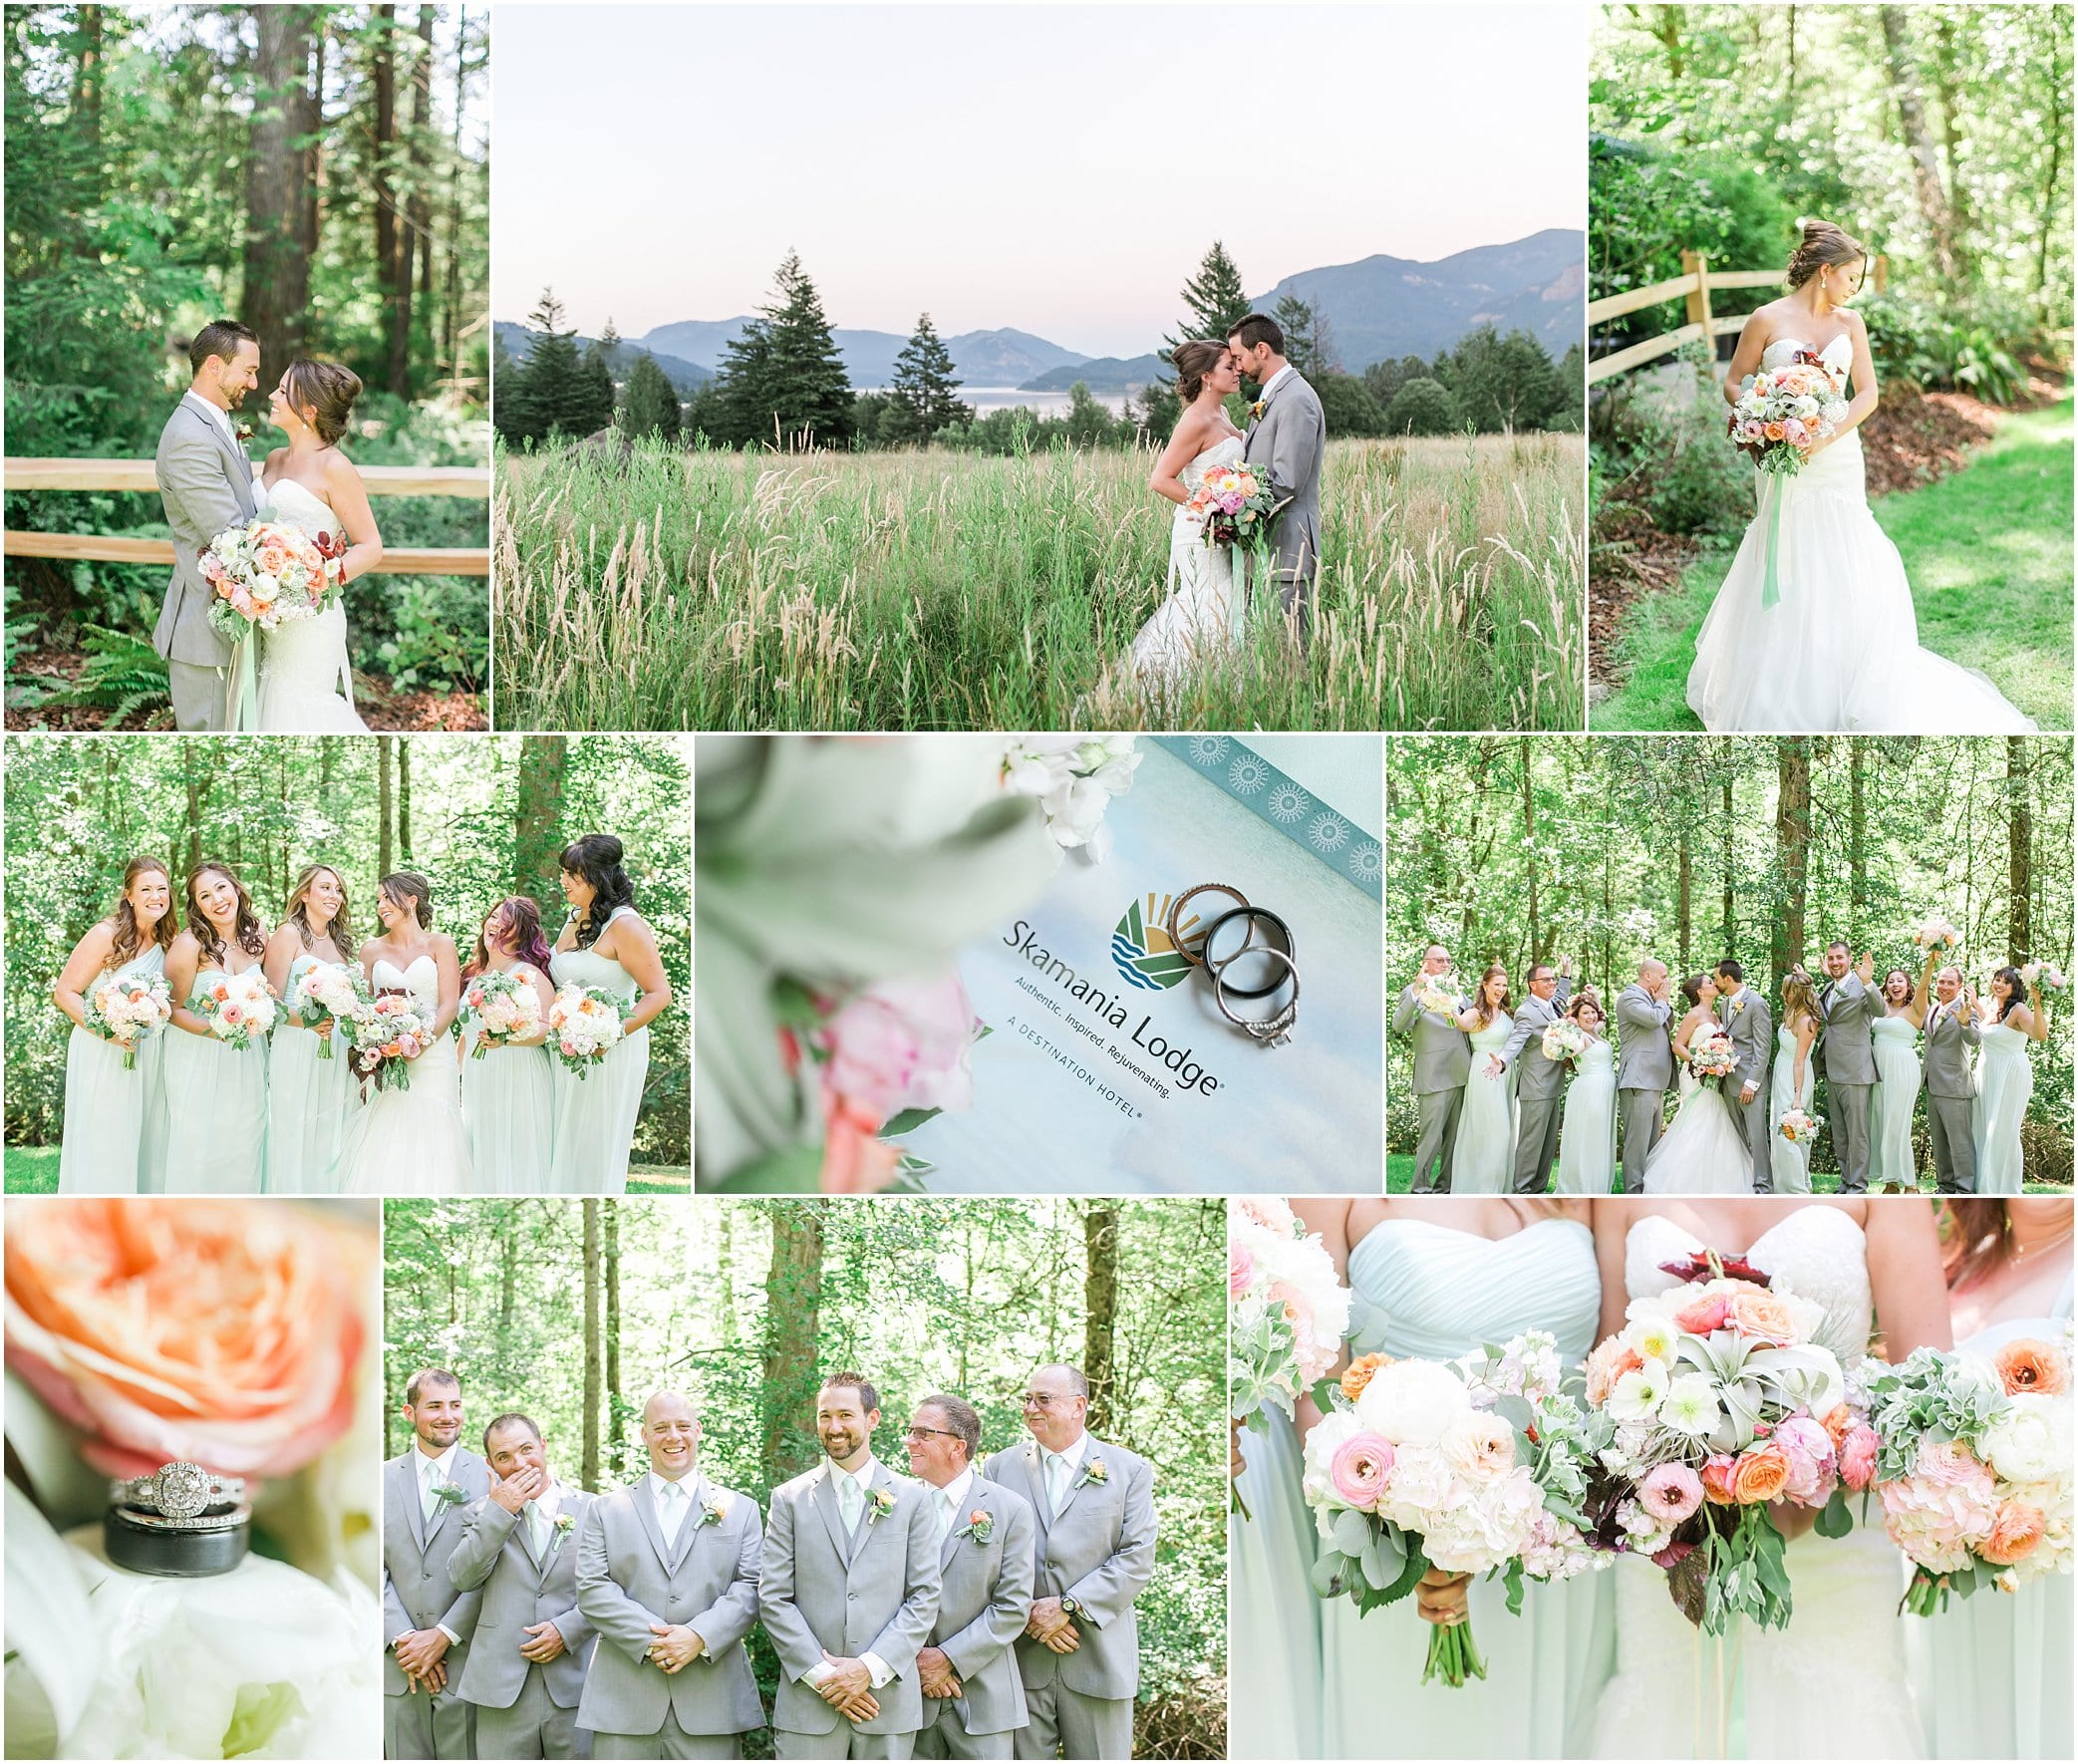 tips for photographers, wedding photographer, seattle wedding photographer, photography tips, pro tips for photography